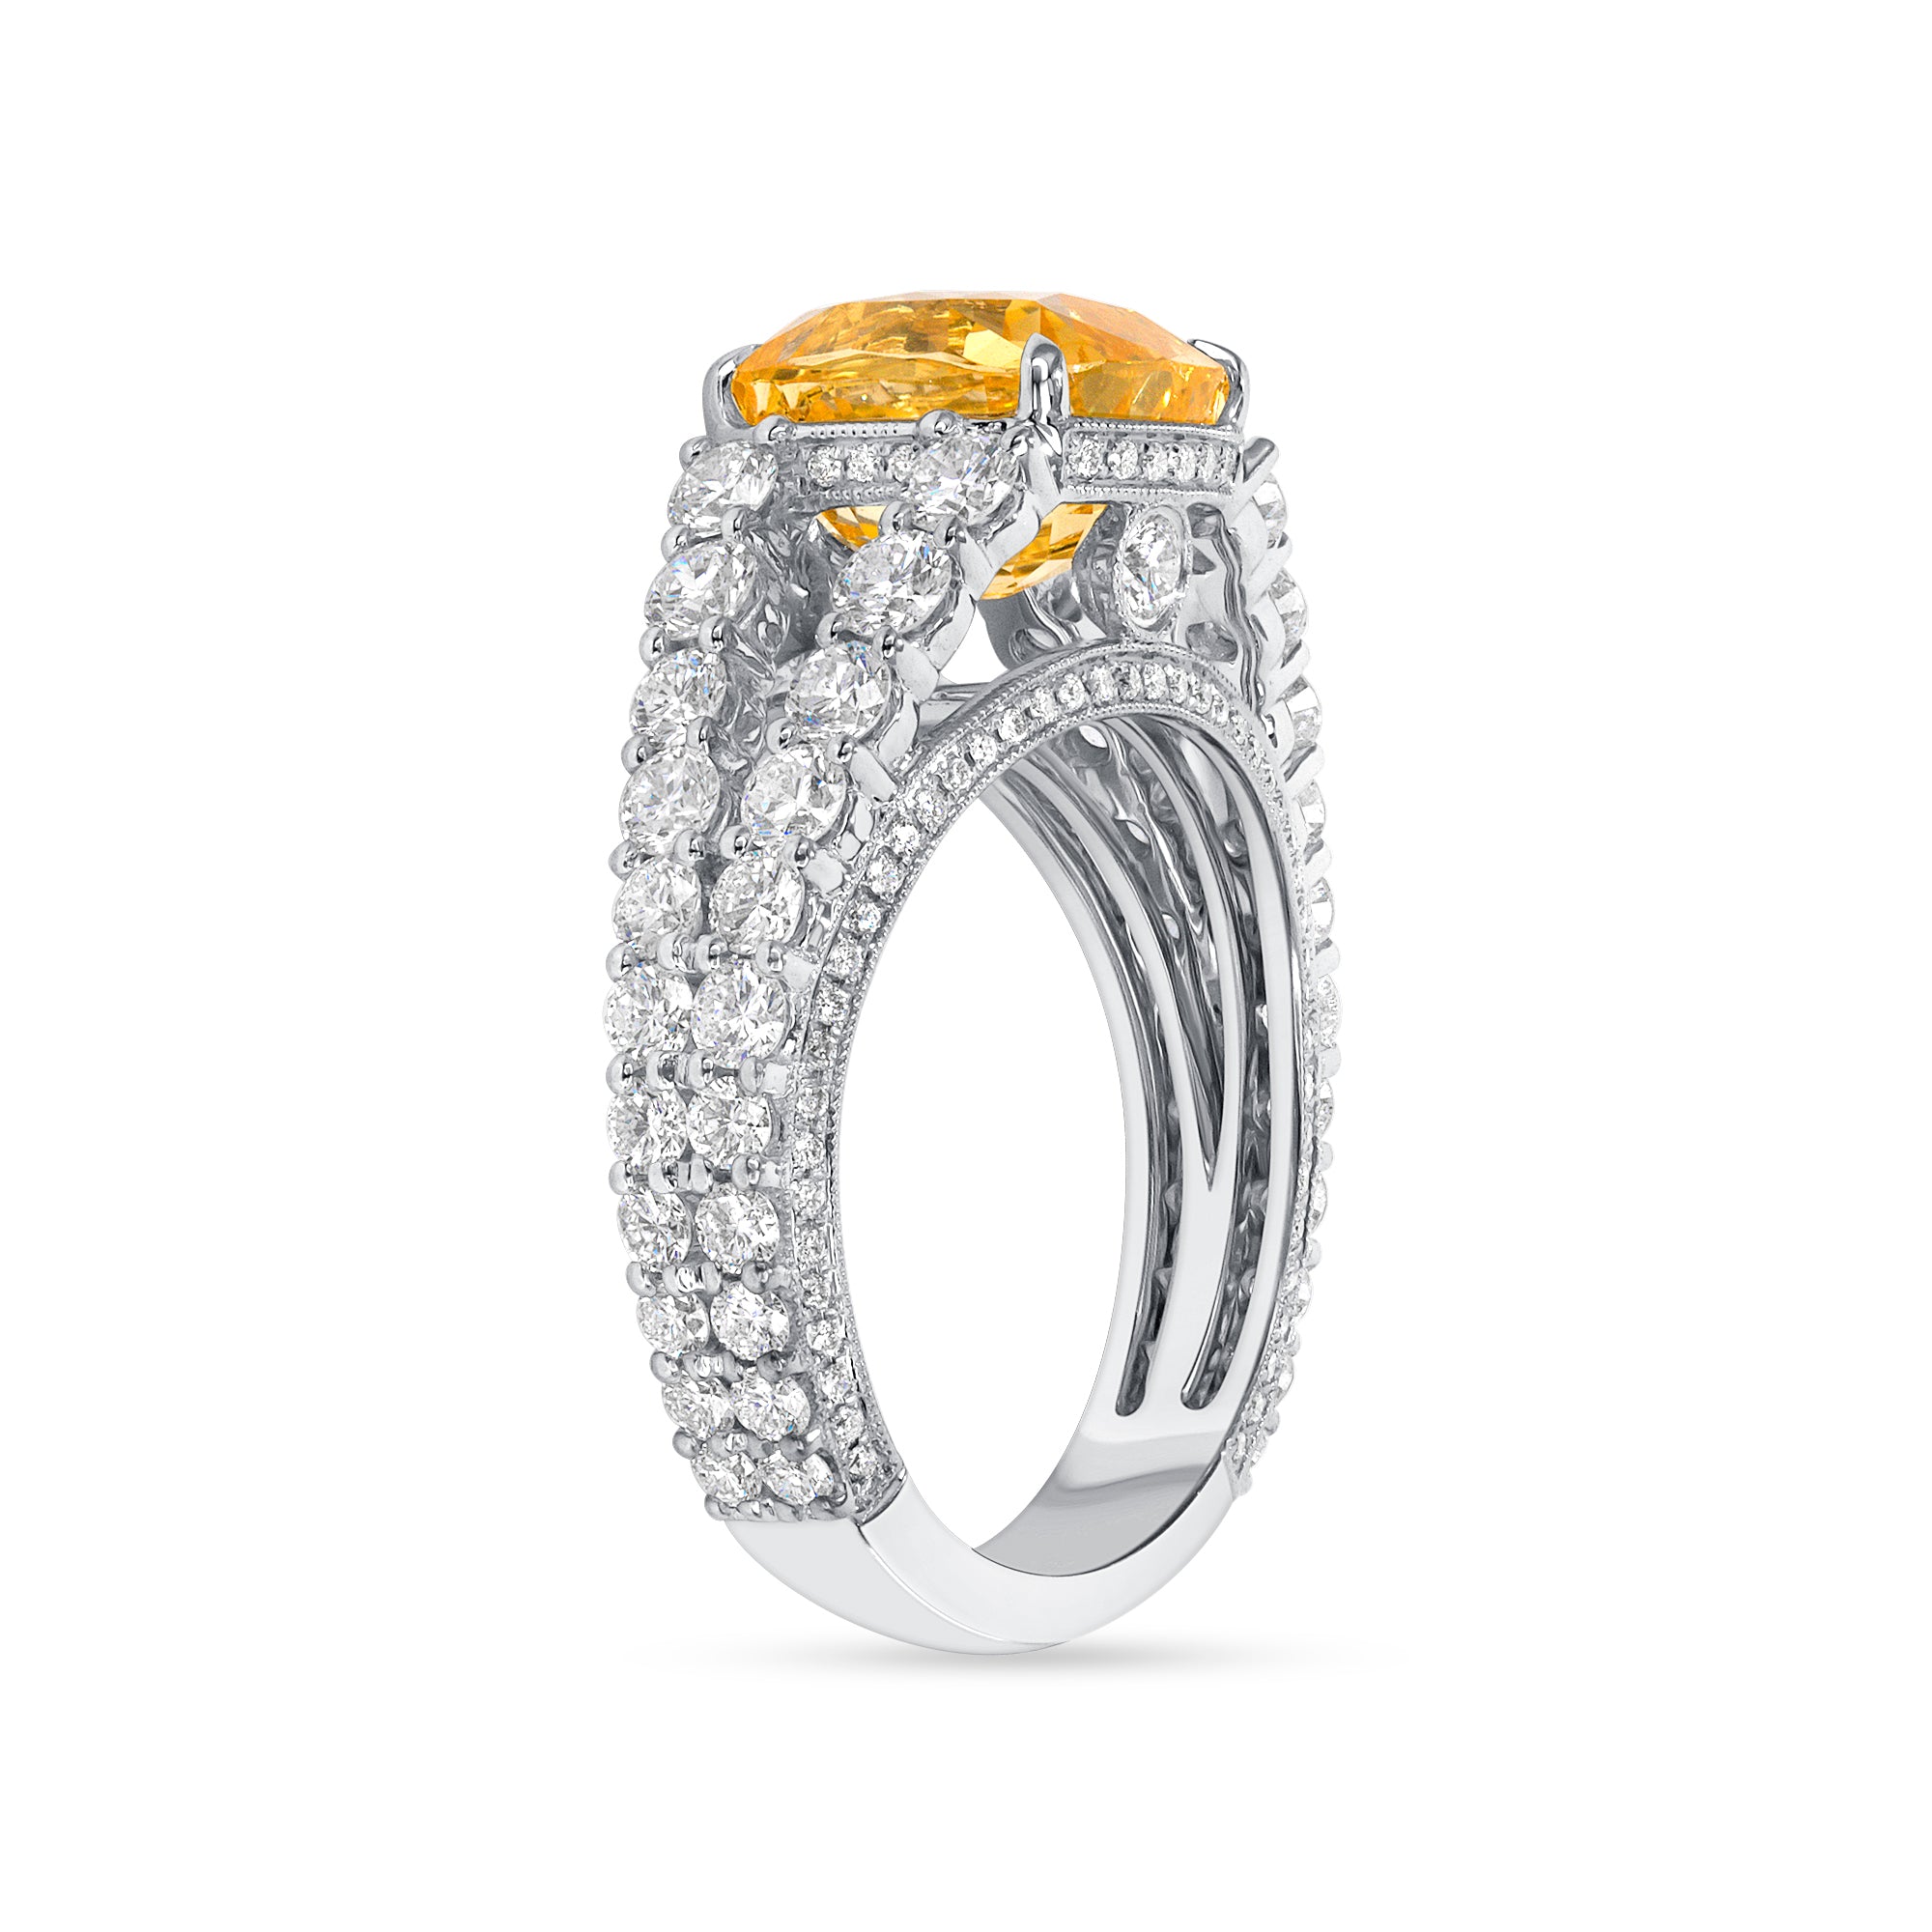 6.39 CT Cushion Cut Yellow Sapphire and Round Brilliant Diamond Ring in 18K White Gold